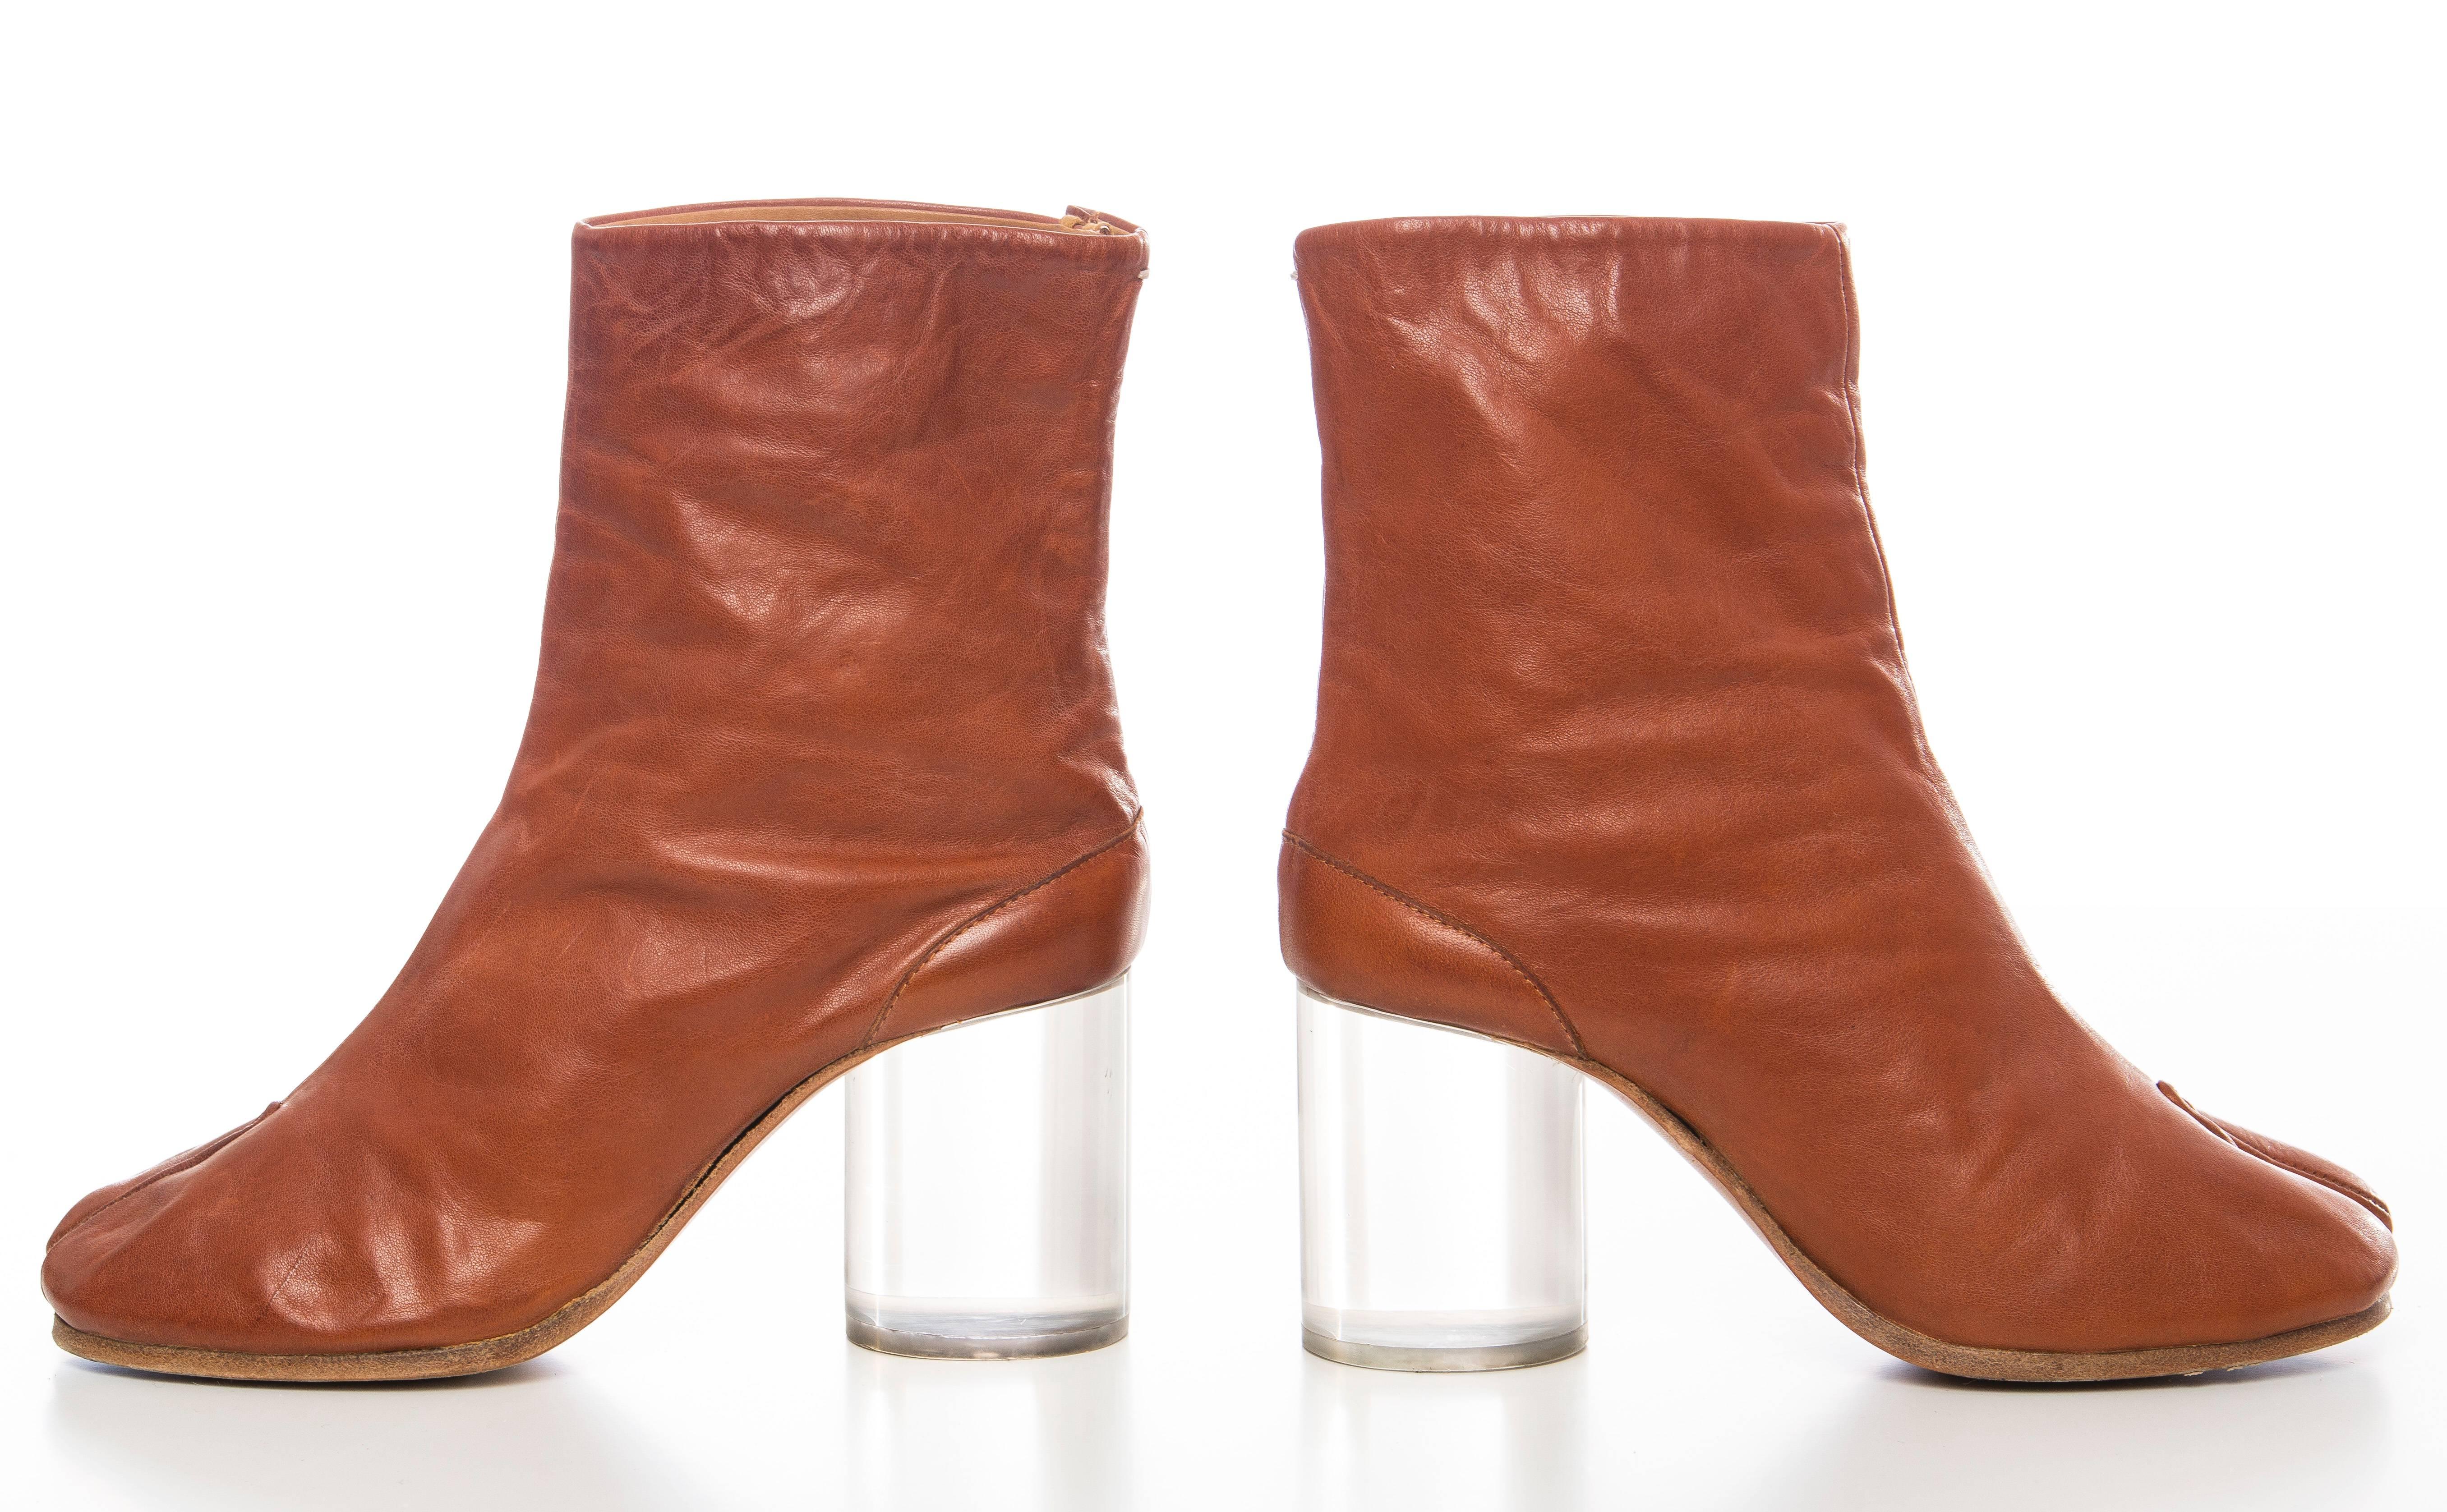  Maison Martin Margiela leather tabi ankle boots, lucite heels and hook-and-bar closures at counters.

IT. 36
US. 6

Heels 2.75